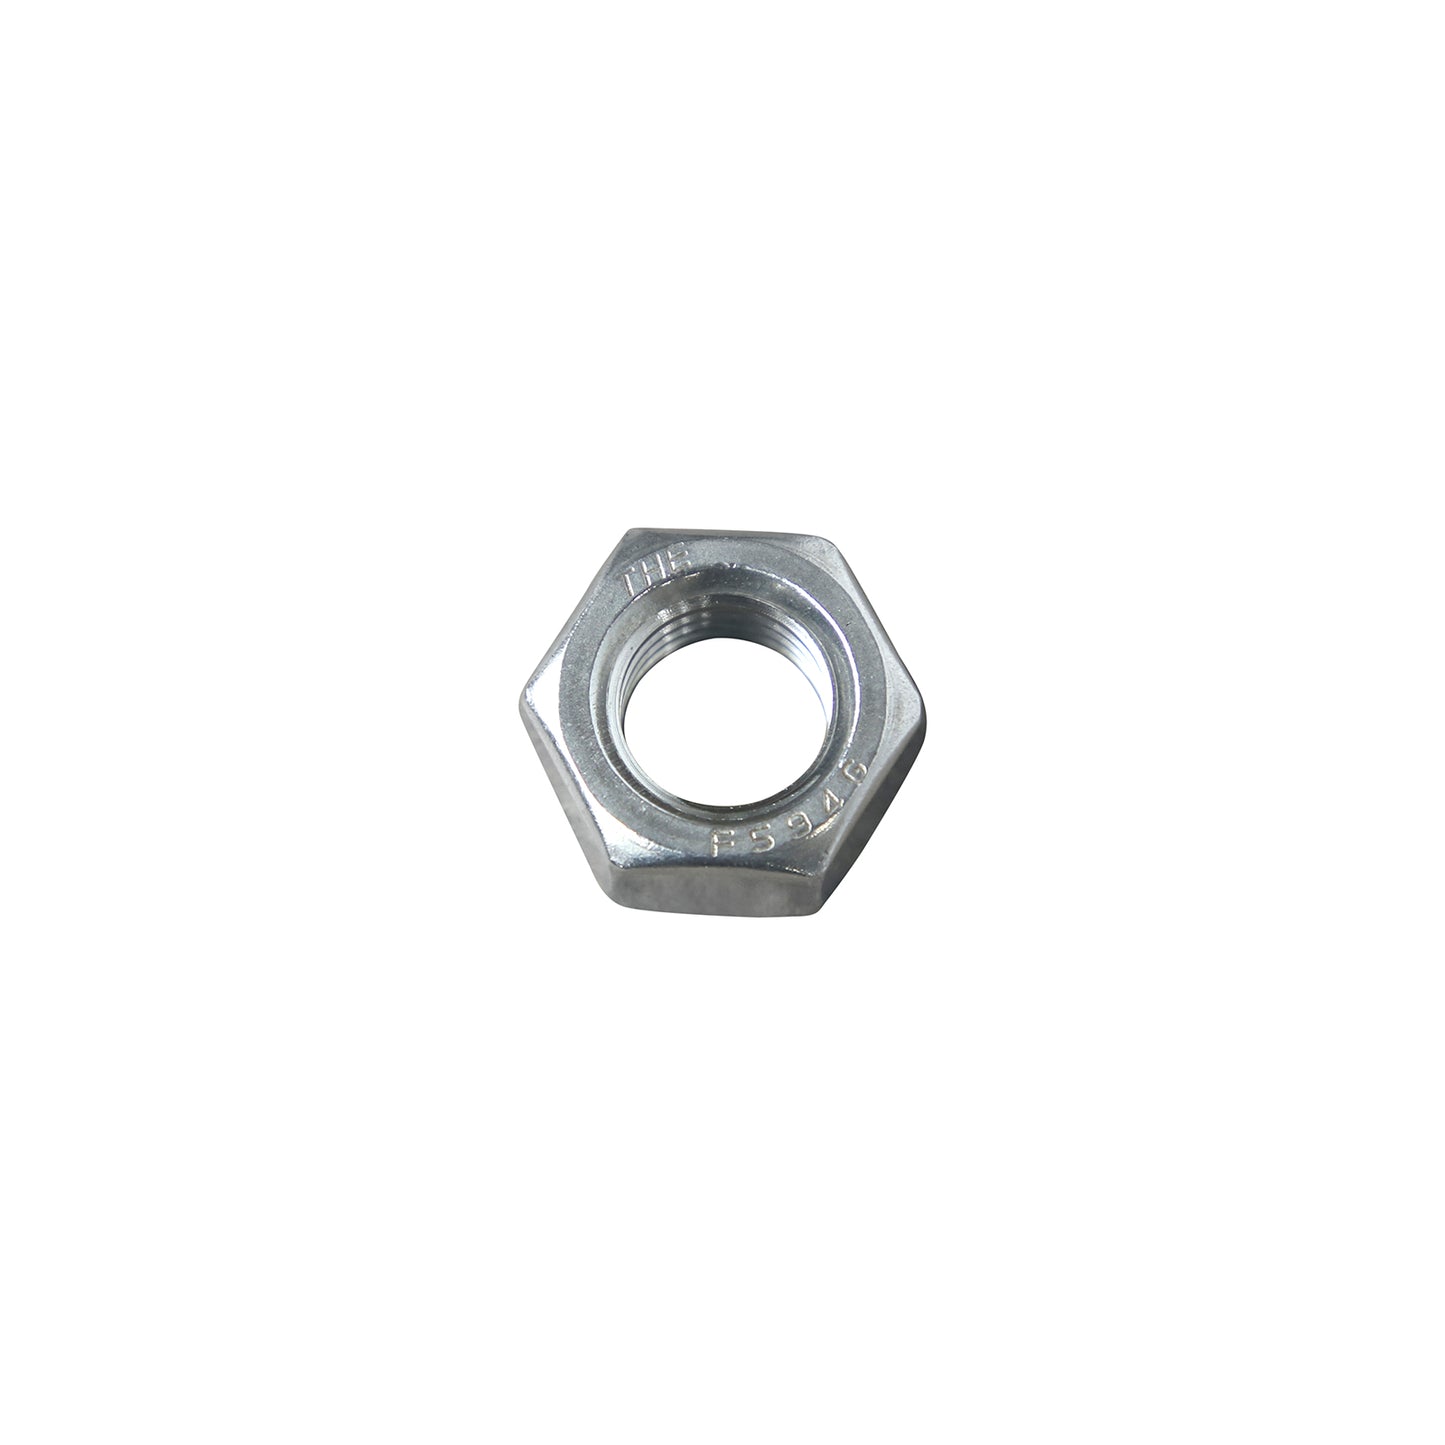 5/8"-11 Conquest Hex Nut - 316 Stainless Steel